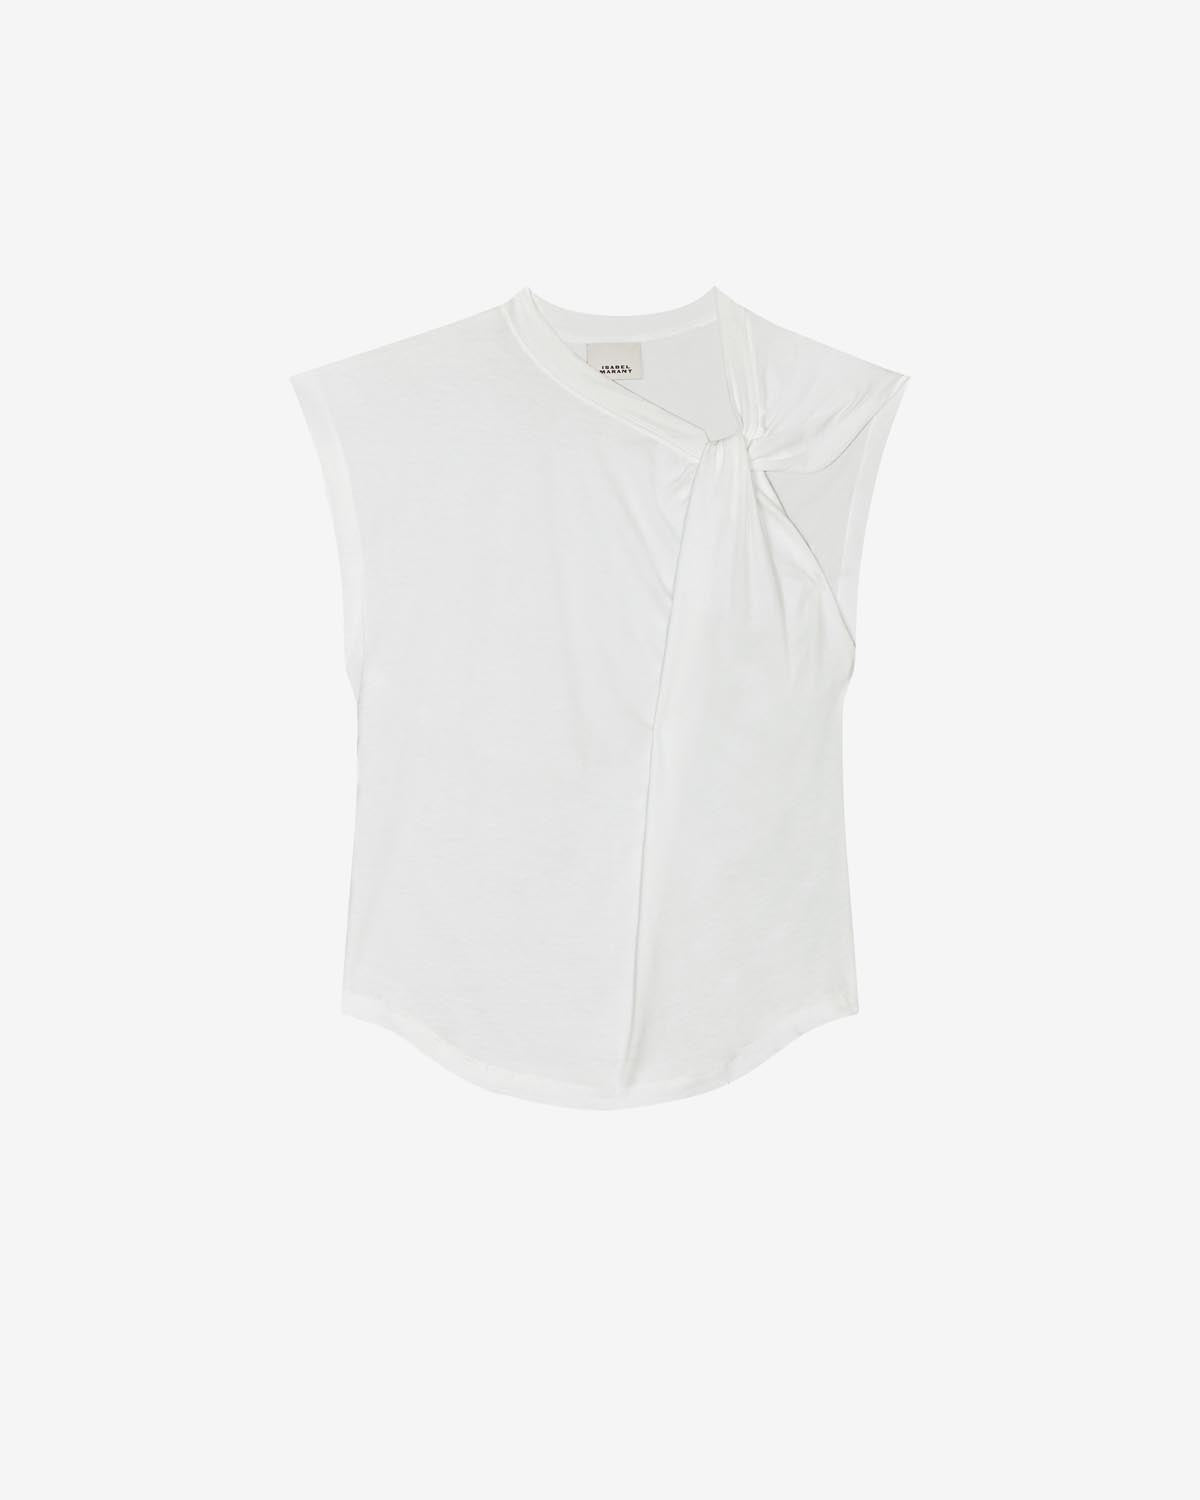 Nayda Tee-Shirt Woman white | ISABEL MARANT Official online store